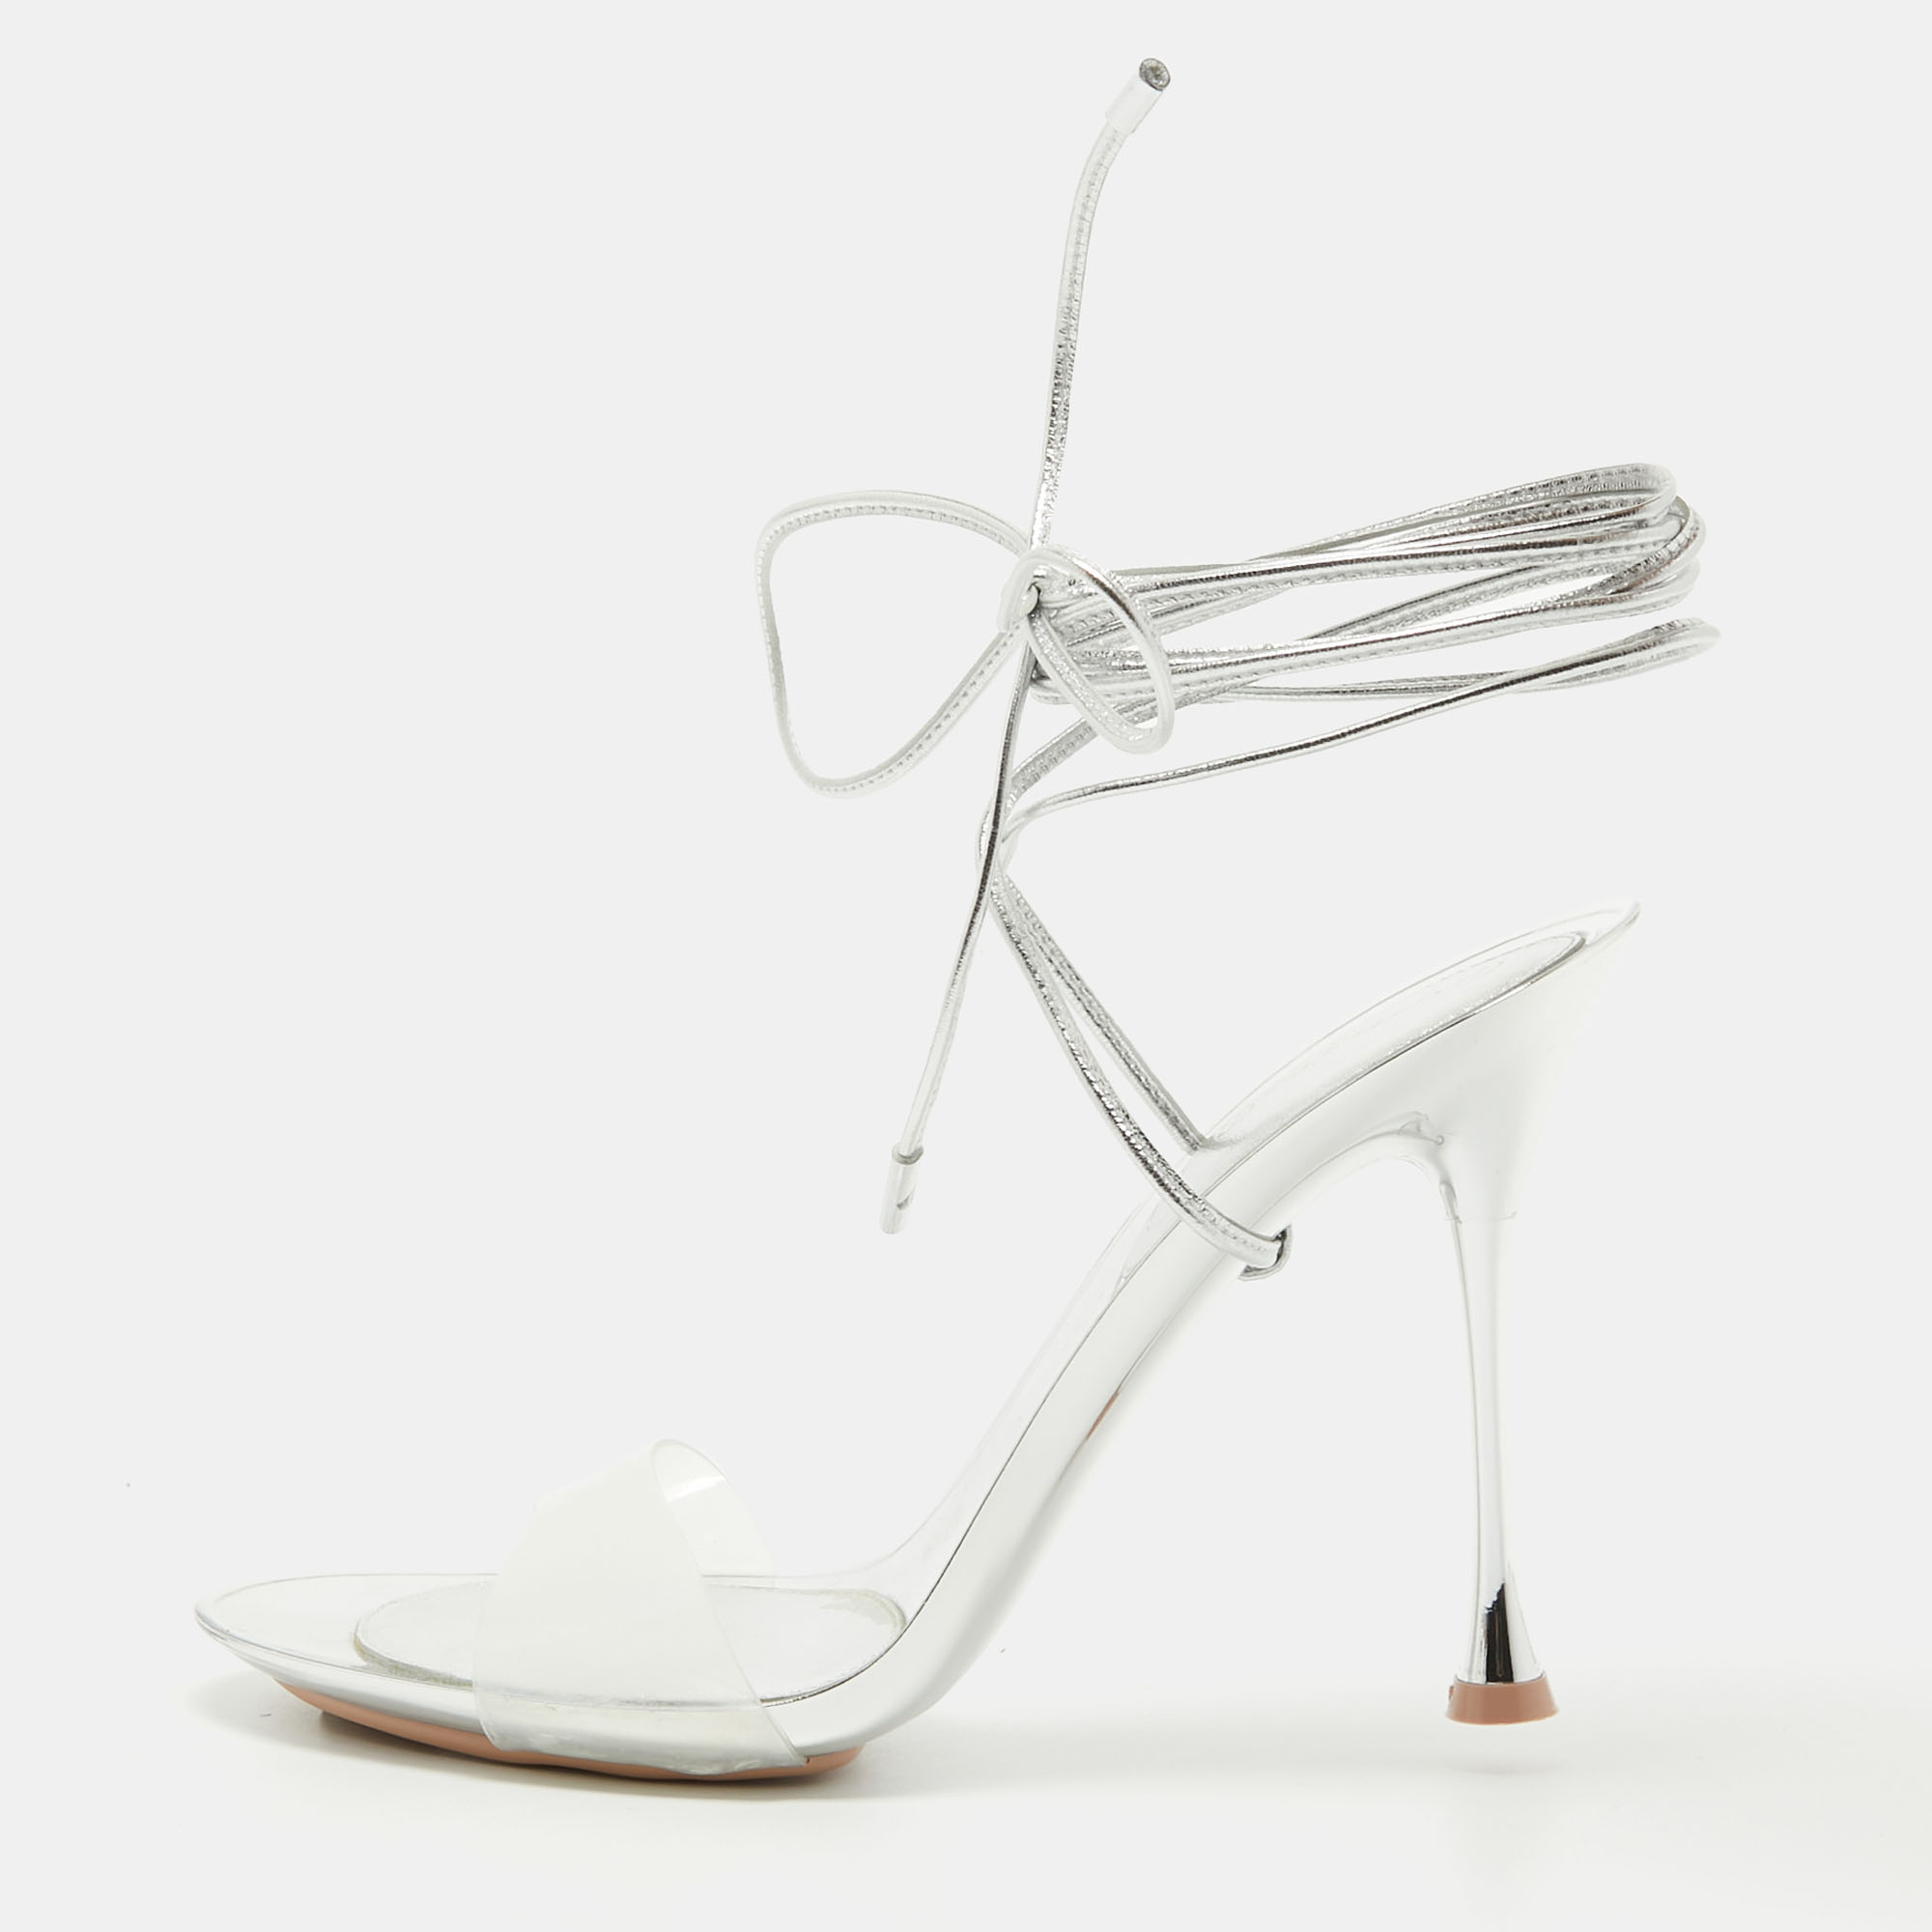 Gianvito rossi transparent/silver pvc and leather spice sandals size 37